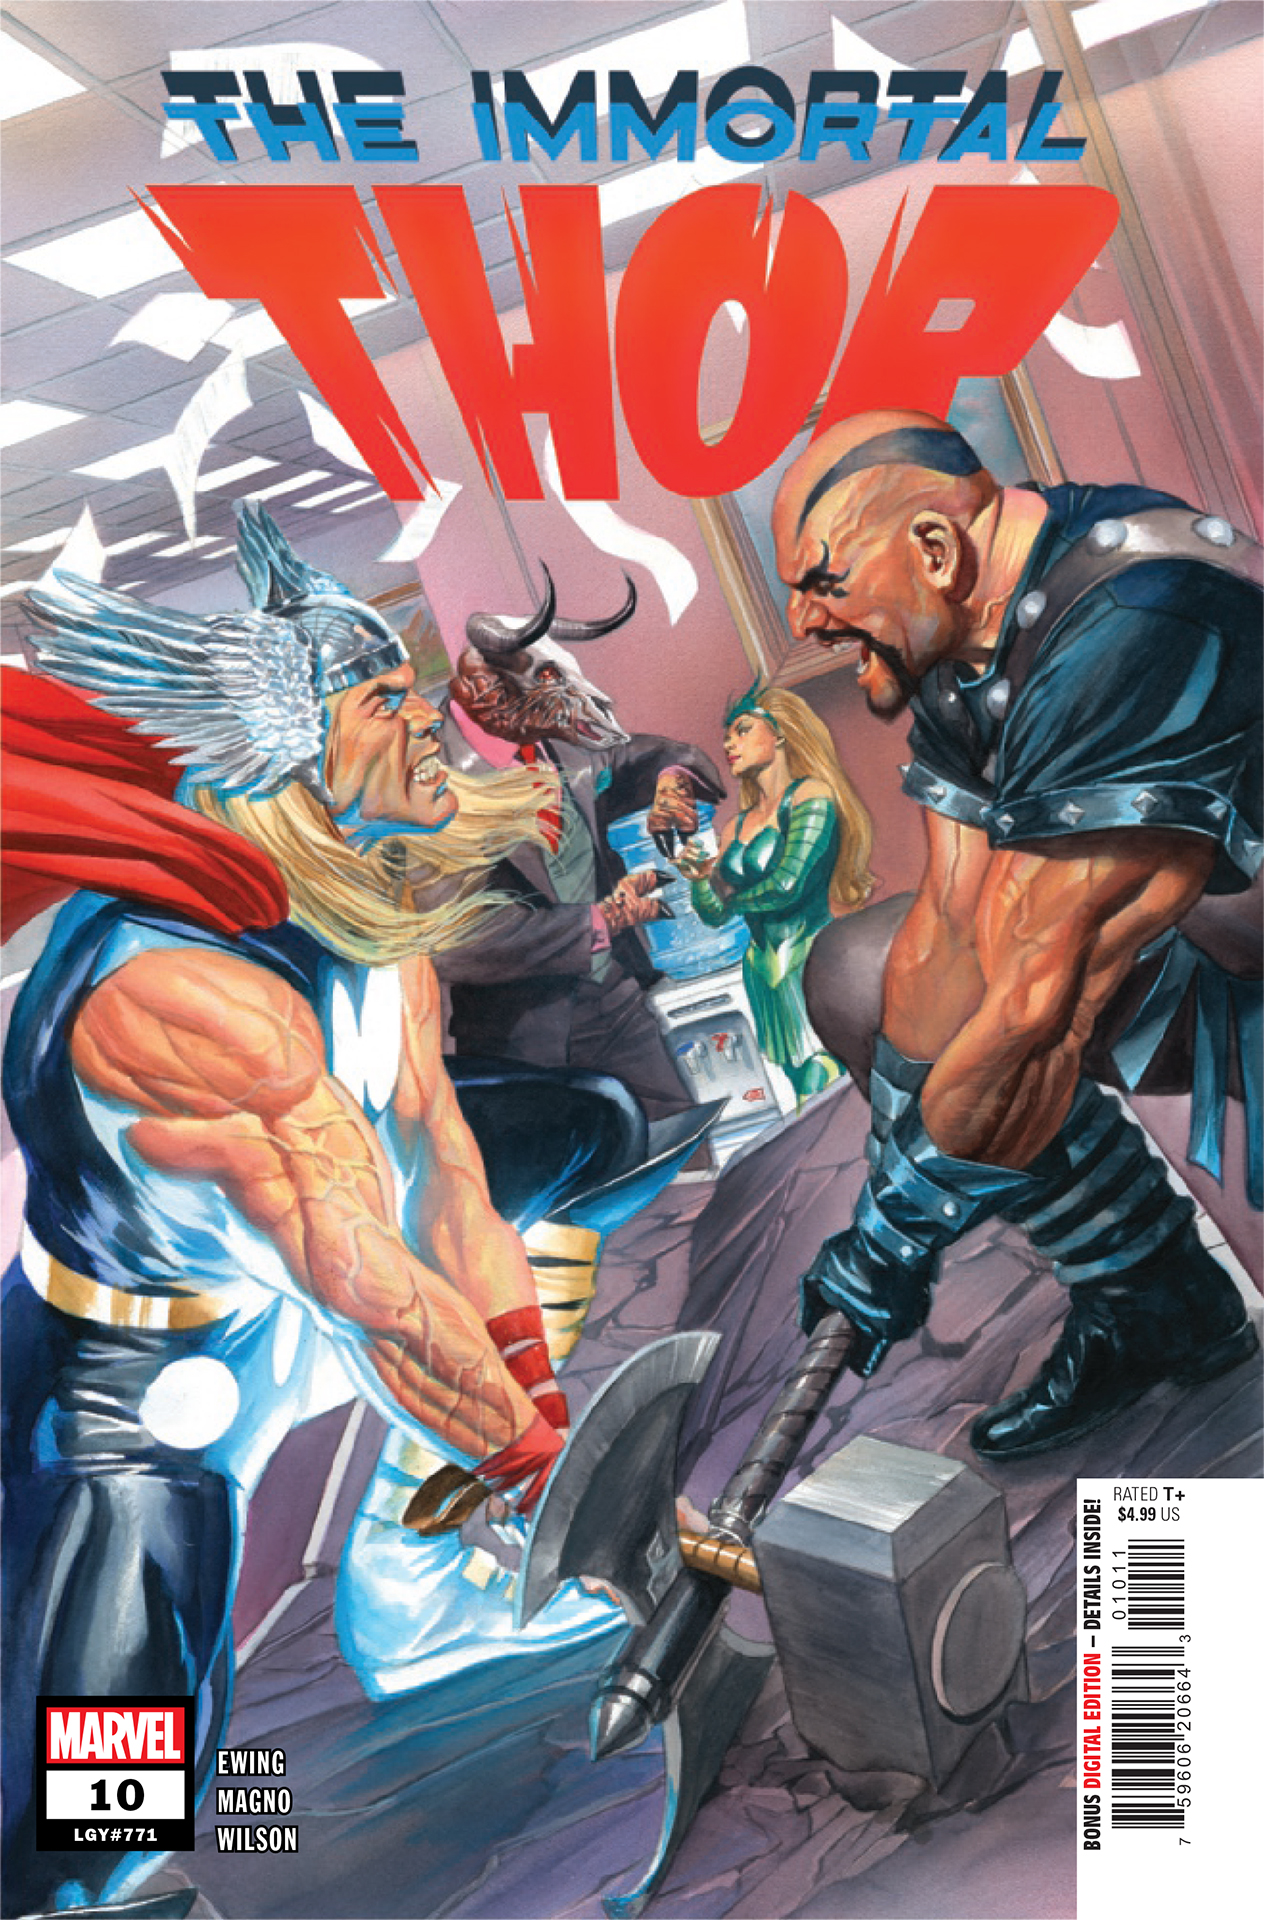 The real Thor comes face-to-face with his capitalist villain doppelganger Chad Hammer in this preview of Immortal Thor #10